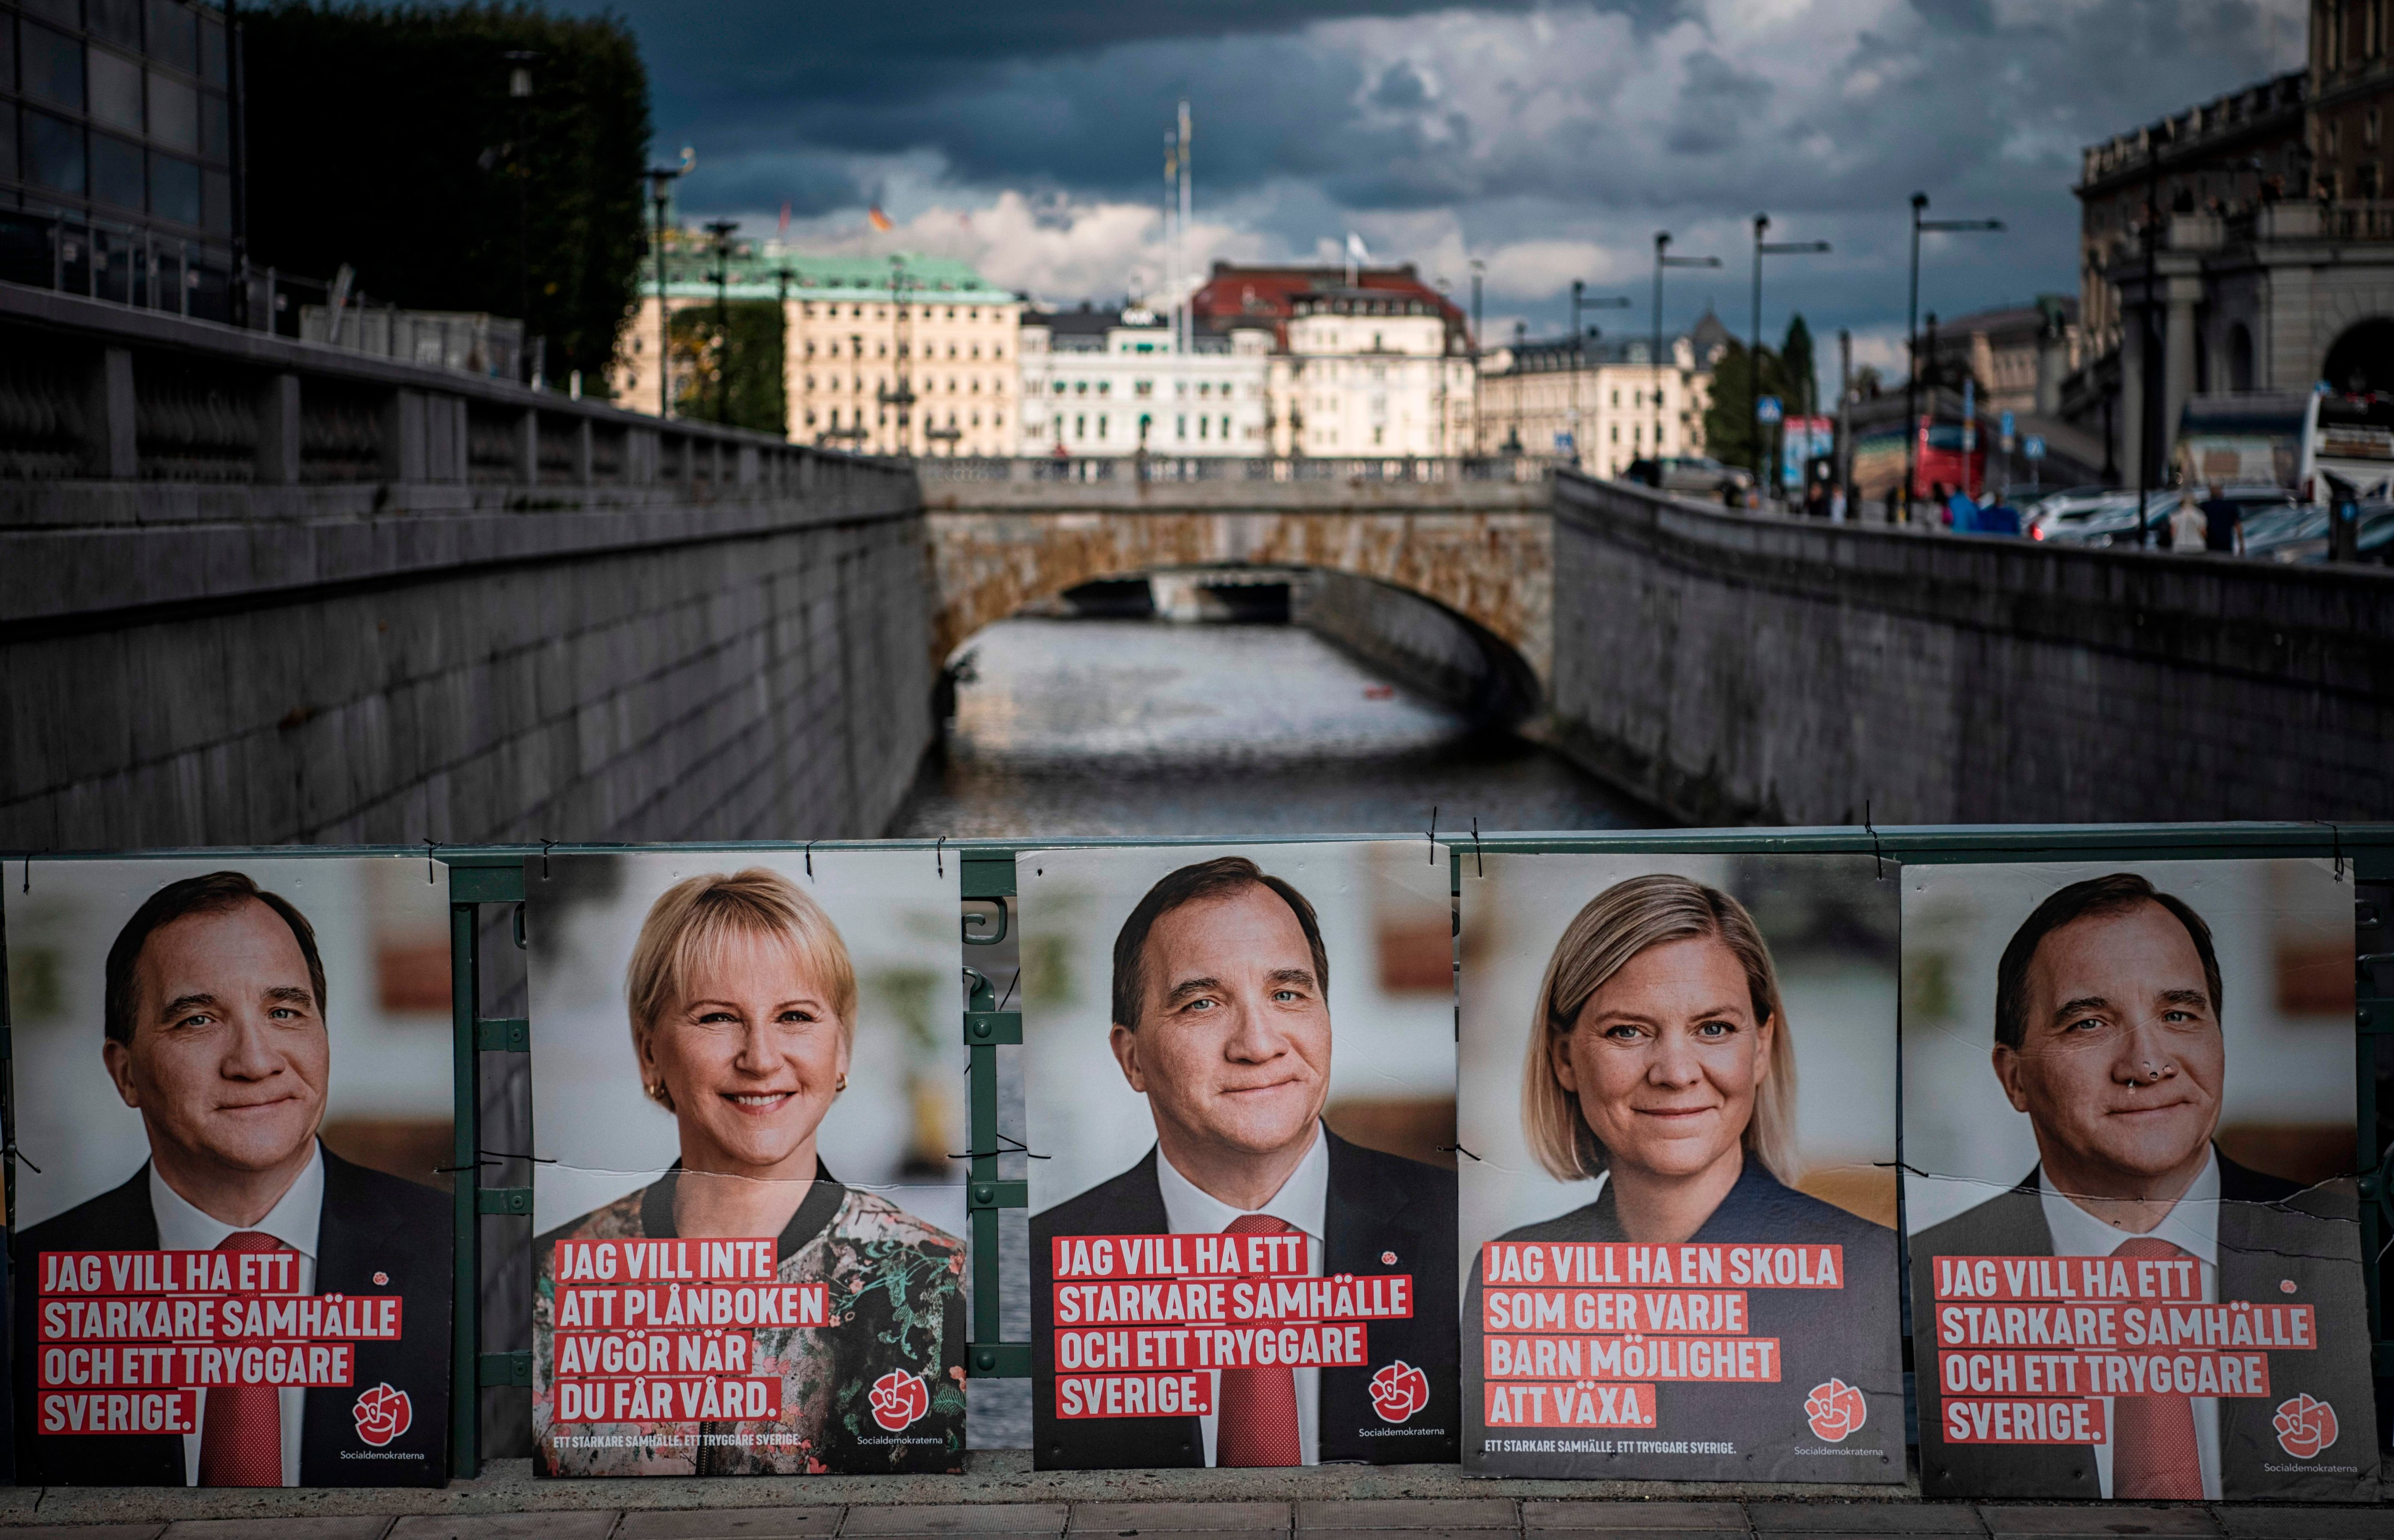 Election posters of the leader of the Social Democrats and Swedish Prime Minister Stefan Loefven, Swedish Minister for Finance Magdalena Andersson (2nd R) and Sweden's Foreign Minister Margot Wallstrom (2nd L) are pictured on September 1, 2018 in Stockholm. (Jonathan Nackstrand—AFP/Getty Images)